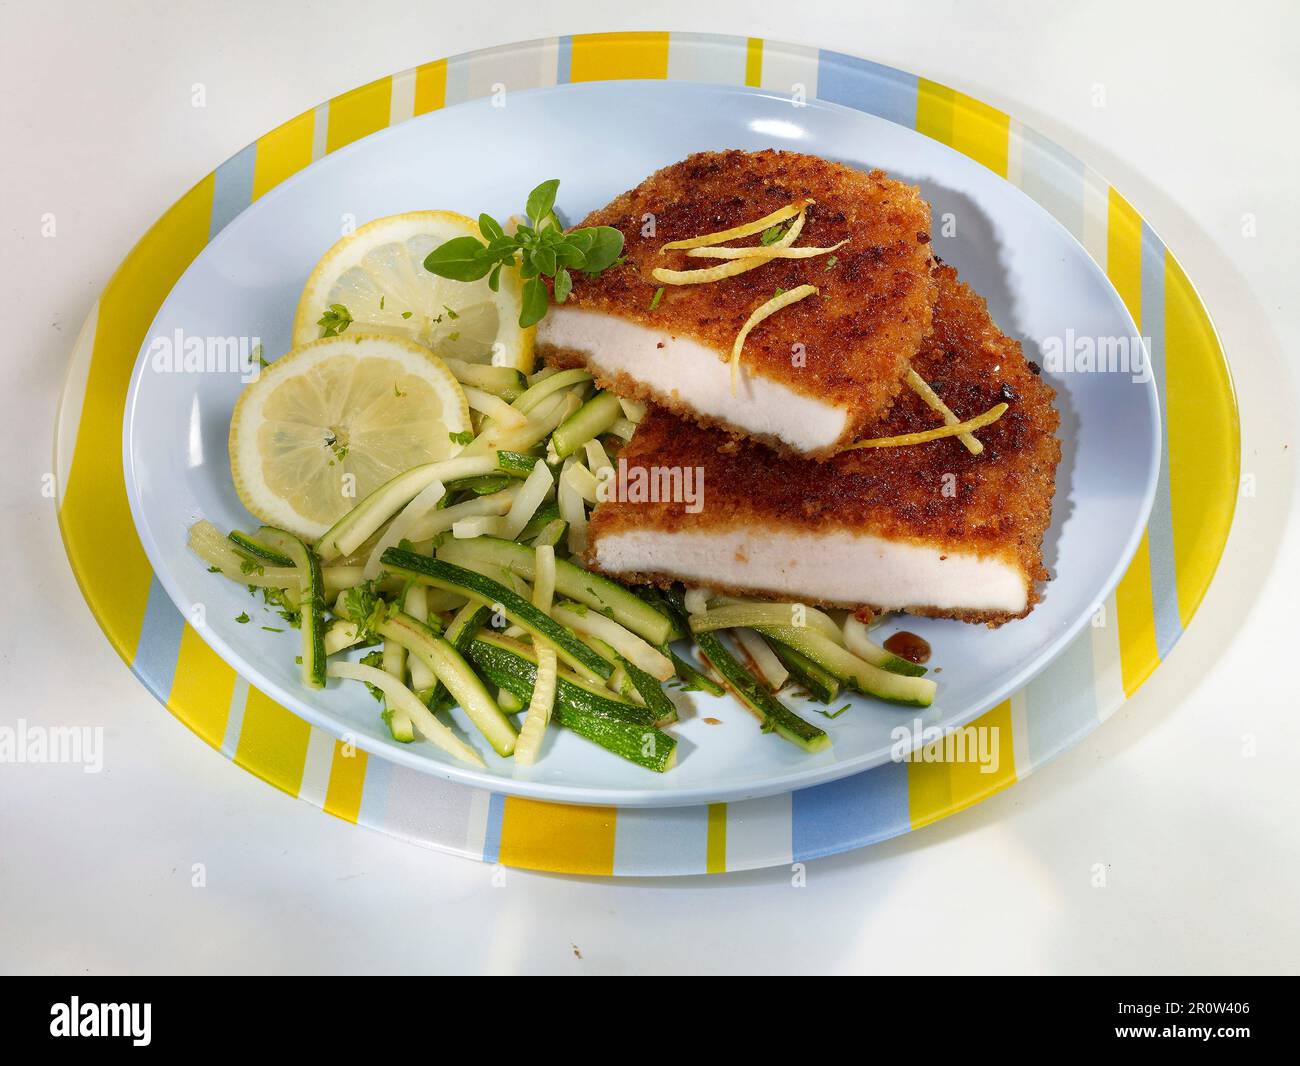 Escalopes breaded with gingerbread crumbs and courgette julienne with lemon Stock Photo